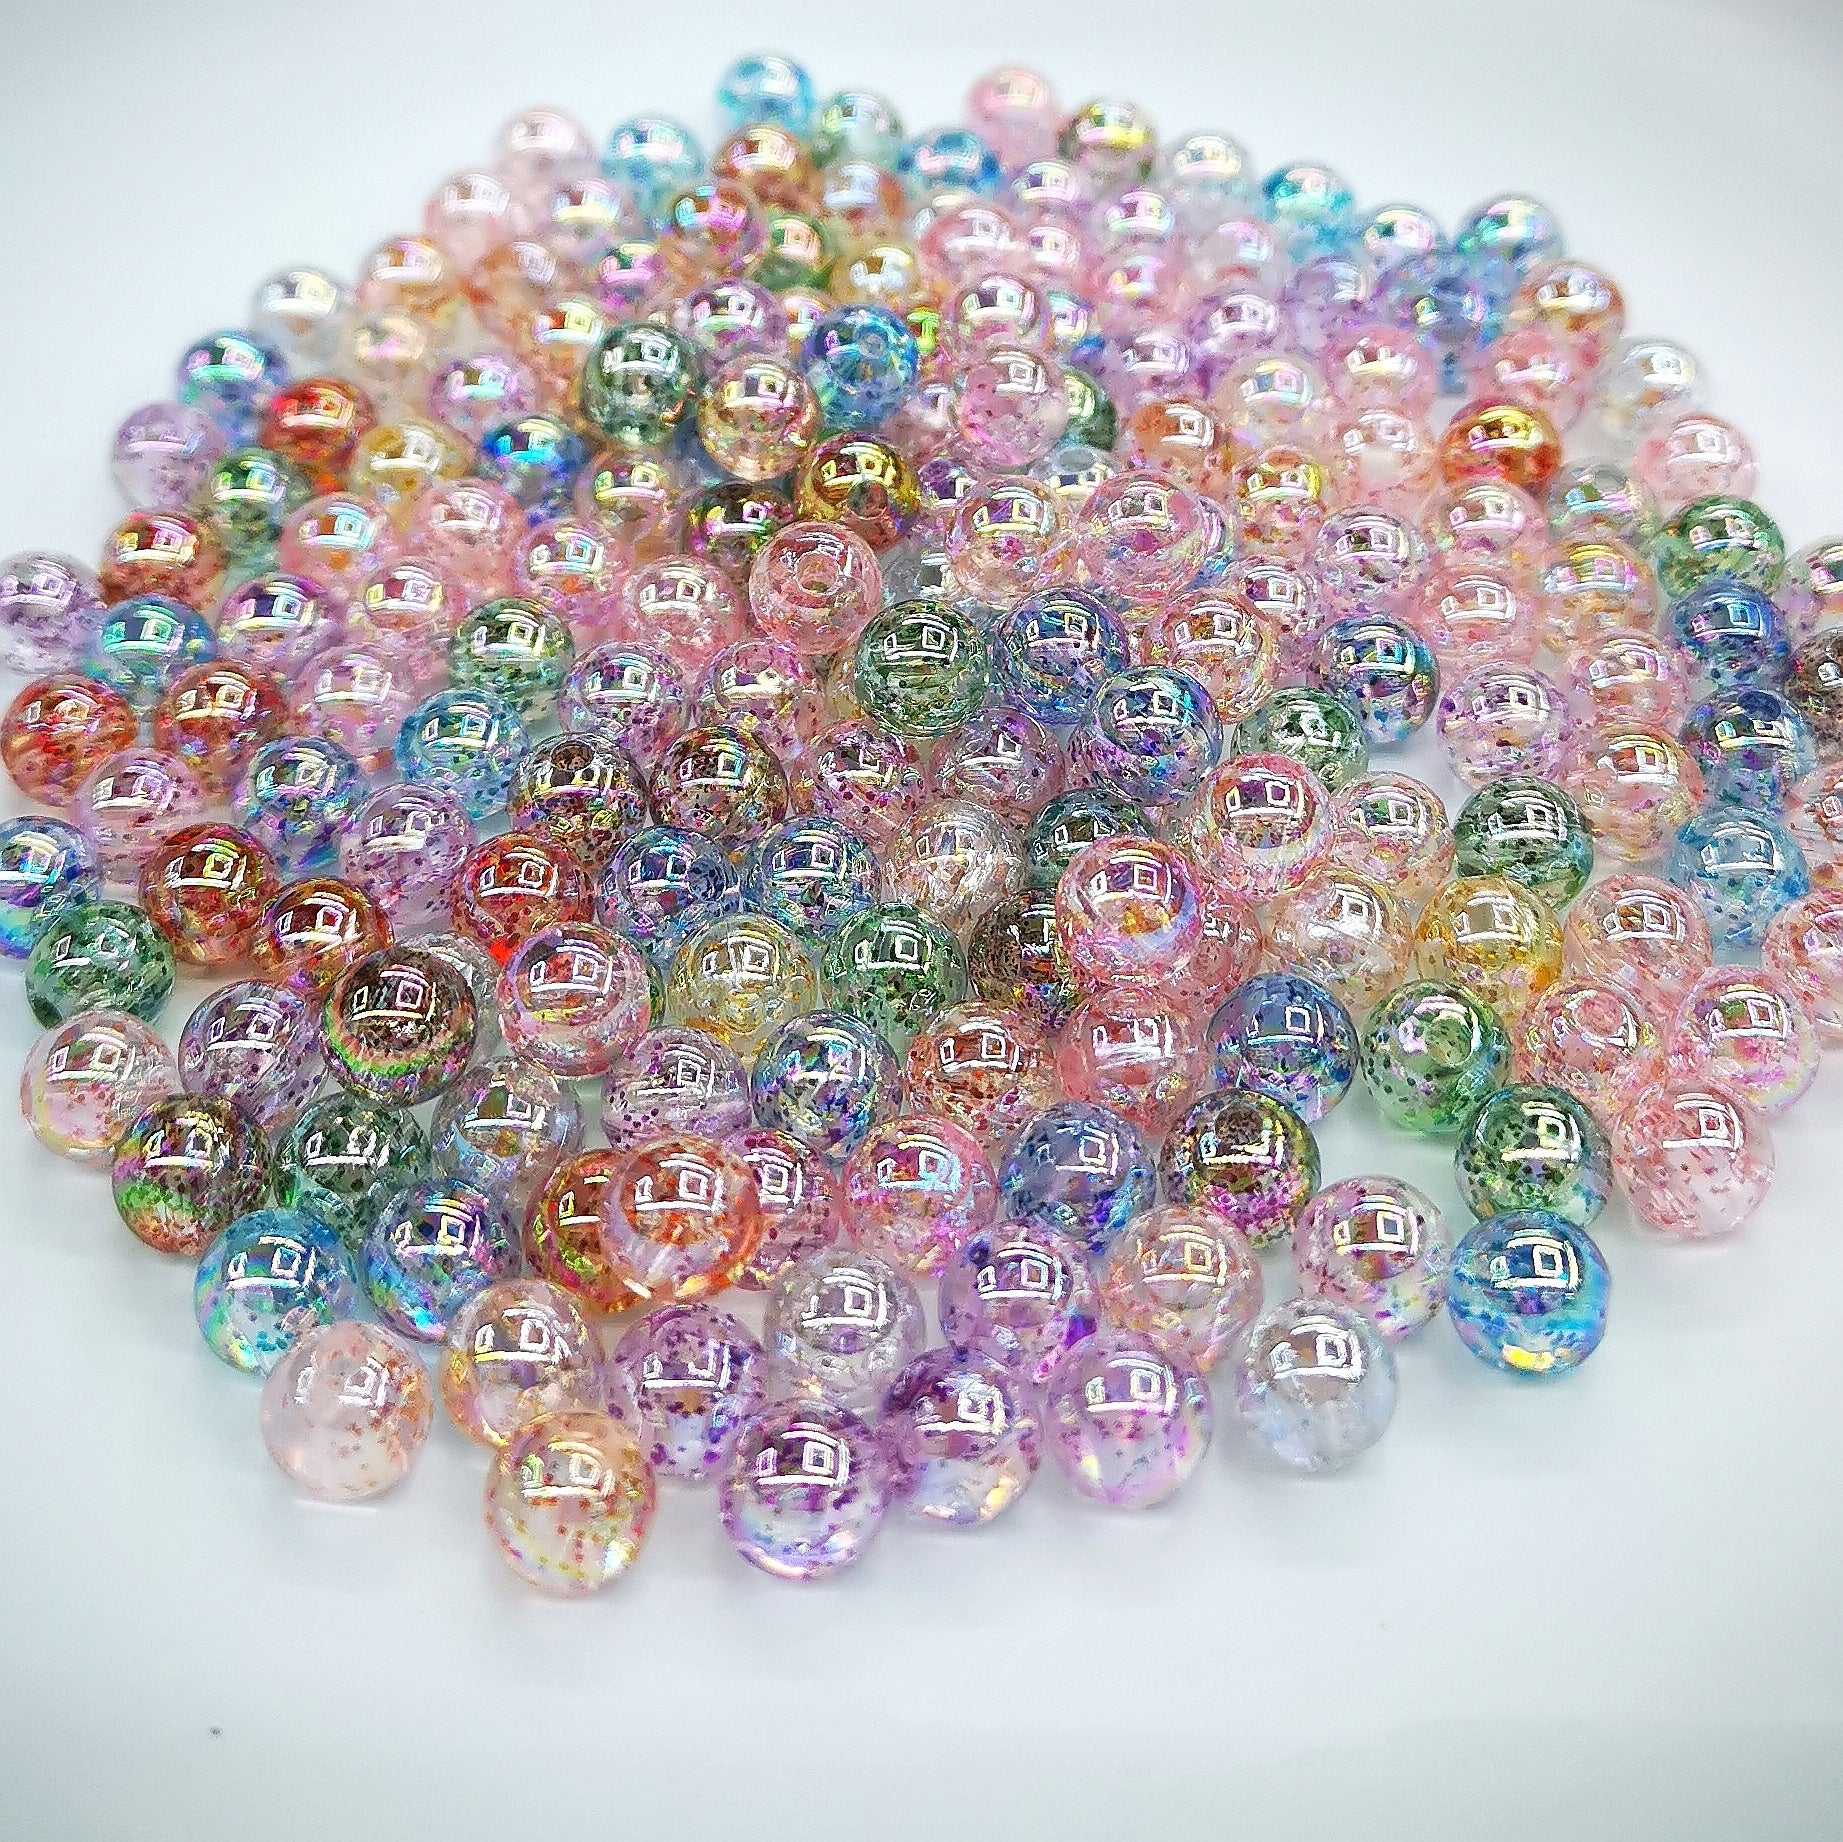 3_2 【8mm】Clear and Solid Acrylic Beads – DIY Mini World